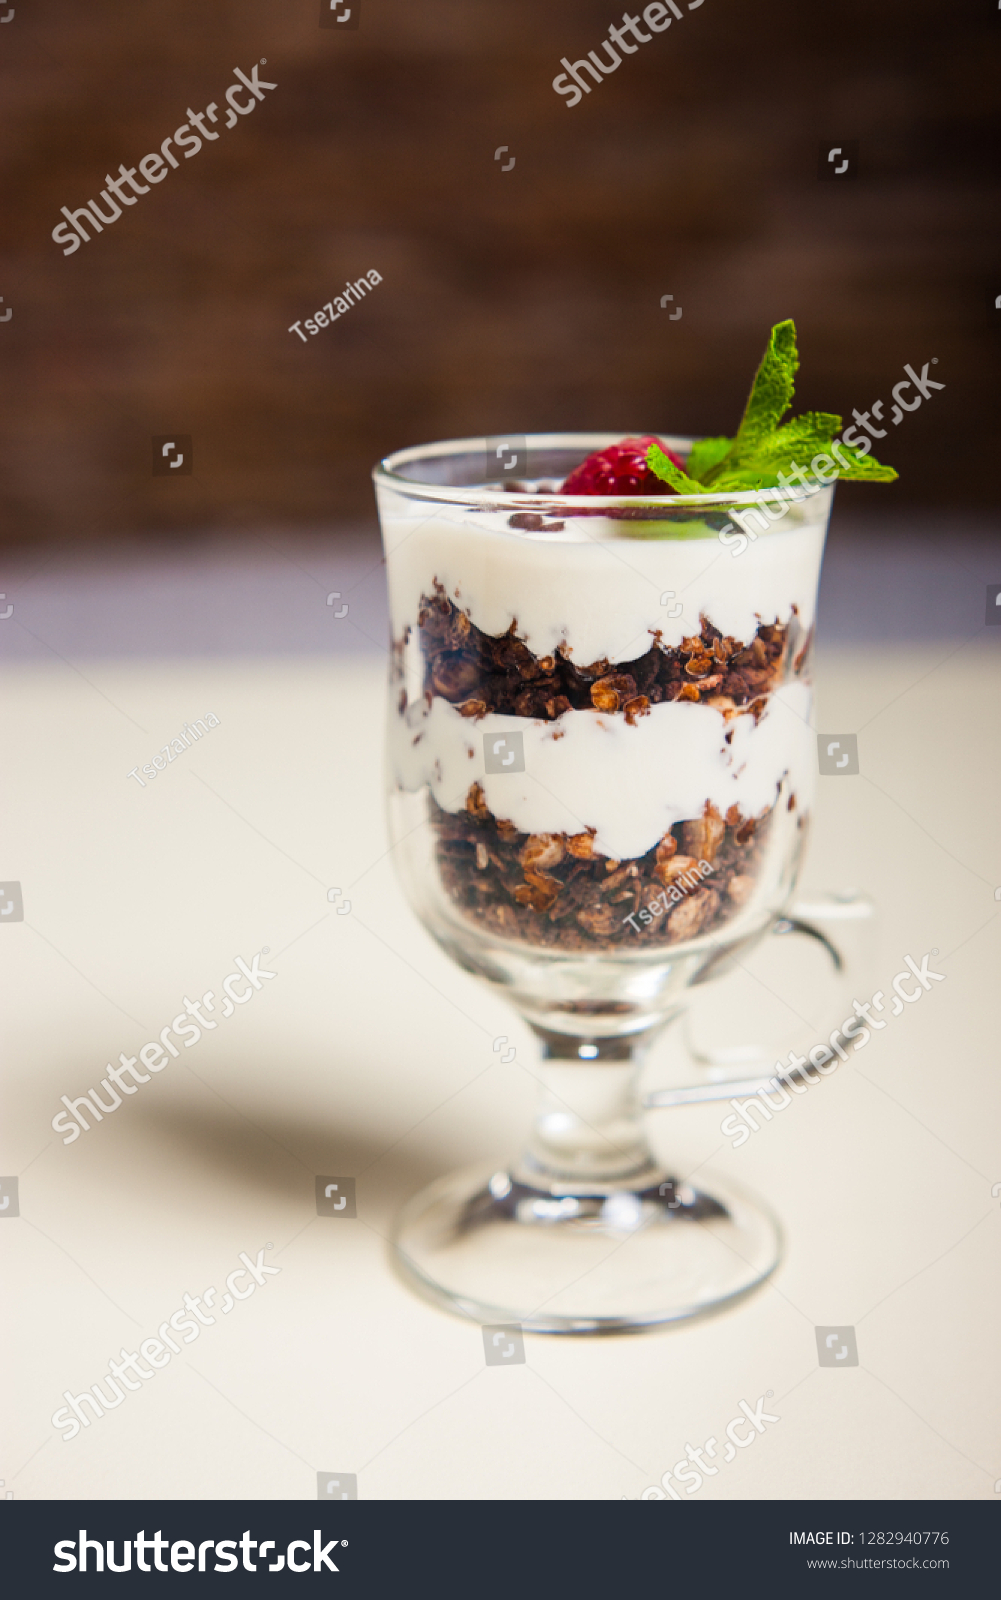 Yogurt with cream, strawberry and muesli served in glass on the table #1282940776